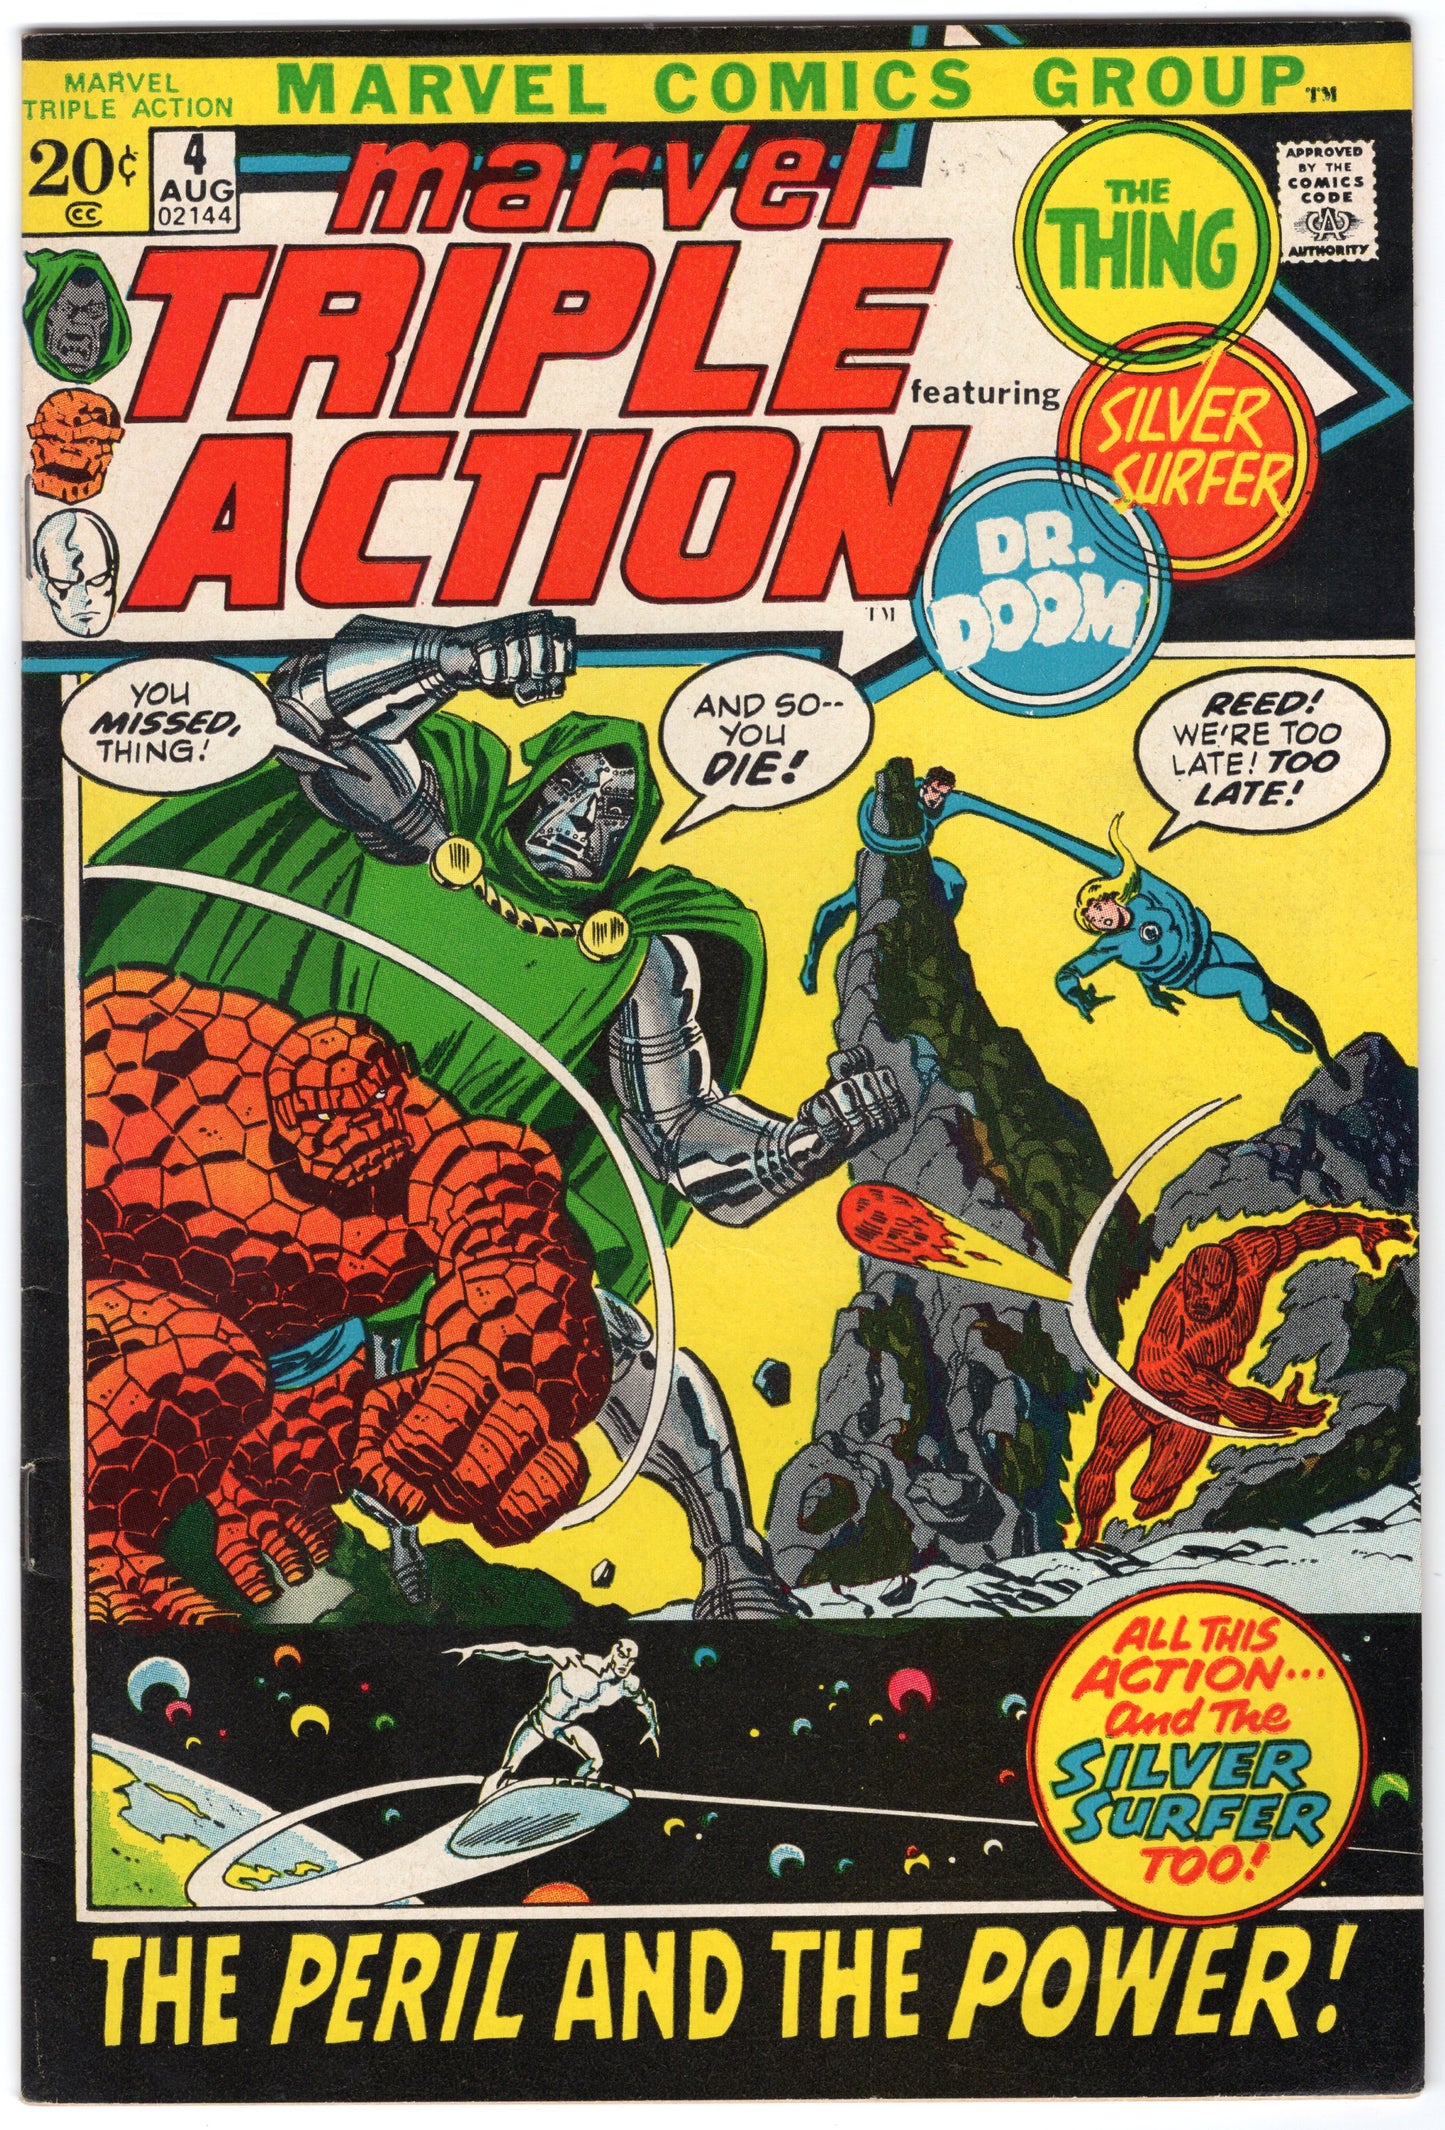 Marvel Triple Action "The Peril and the Power" - Issue #4 (Aug. 1972 - Marvel Comics) FN+